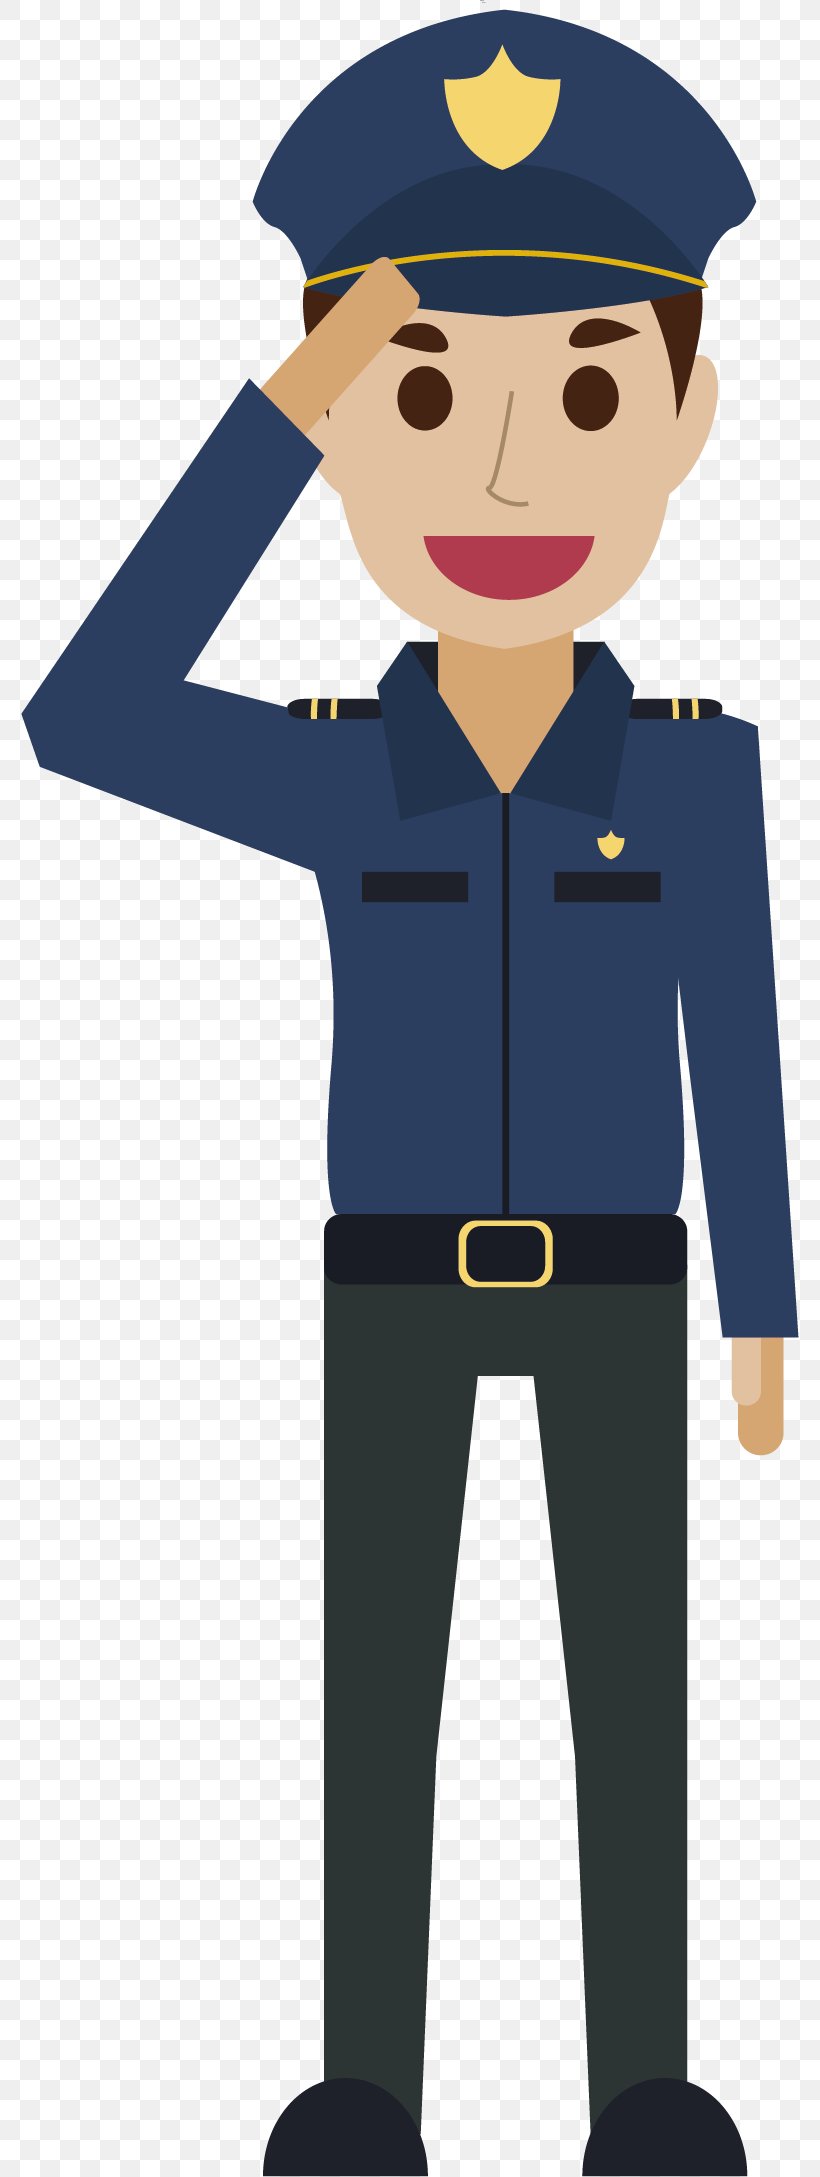 Police Officer Salute Clip Art, PNG, 778x2177px, Police, Baton, Cartoon, Civil Police, Headgear Download Free